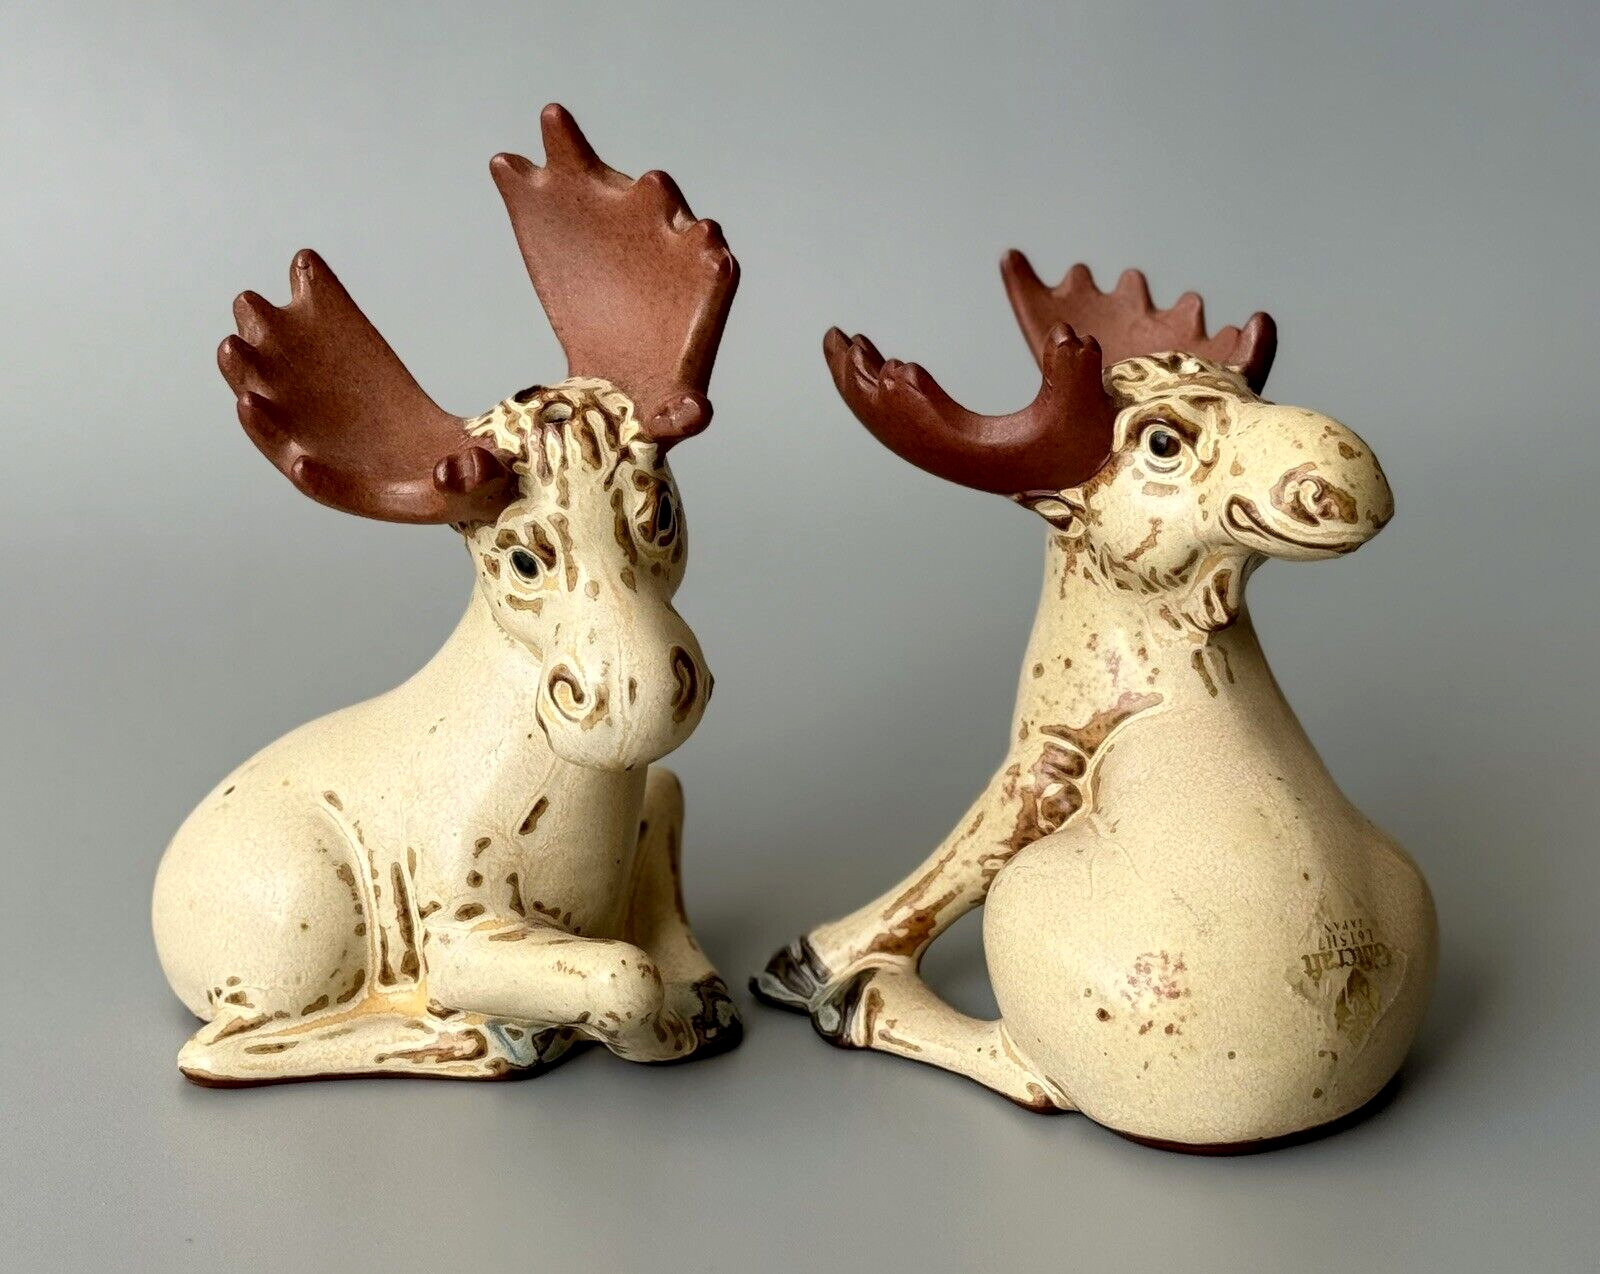 Gempo Pottery Japan 1970s Vtg Bull Moose Salt & Pepper Shakers Giftcraft UCTCI